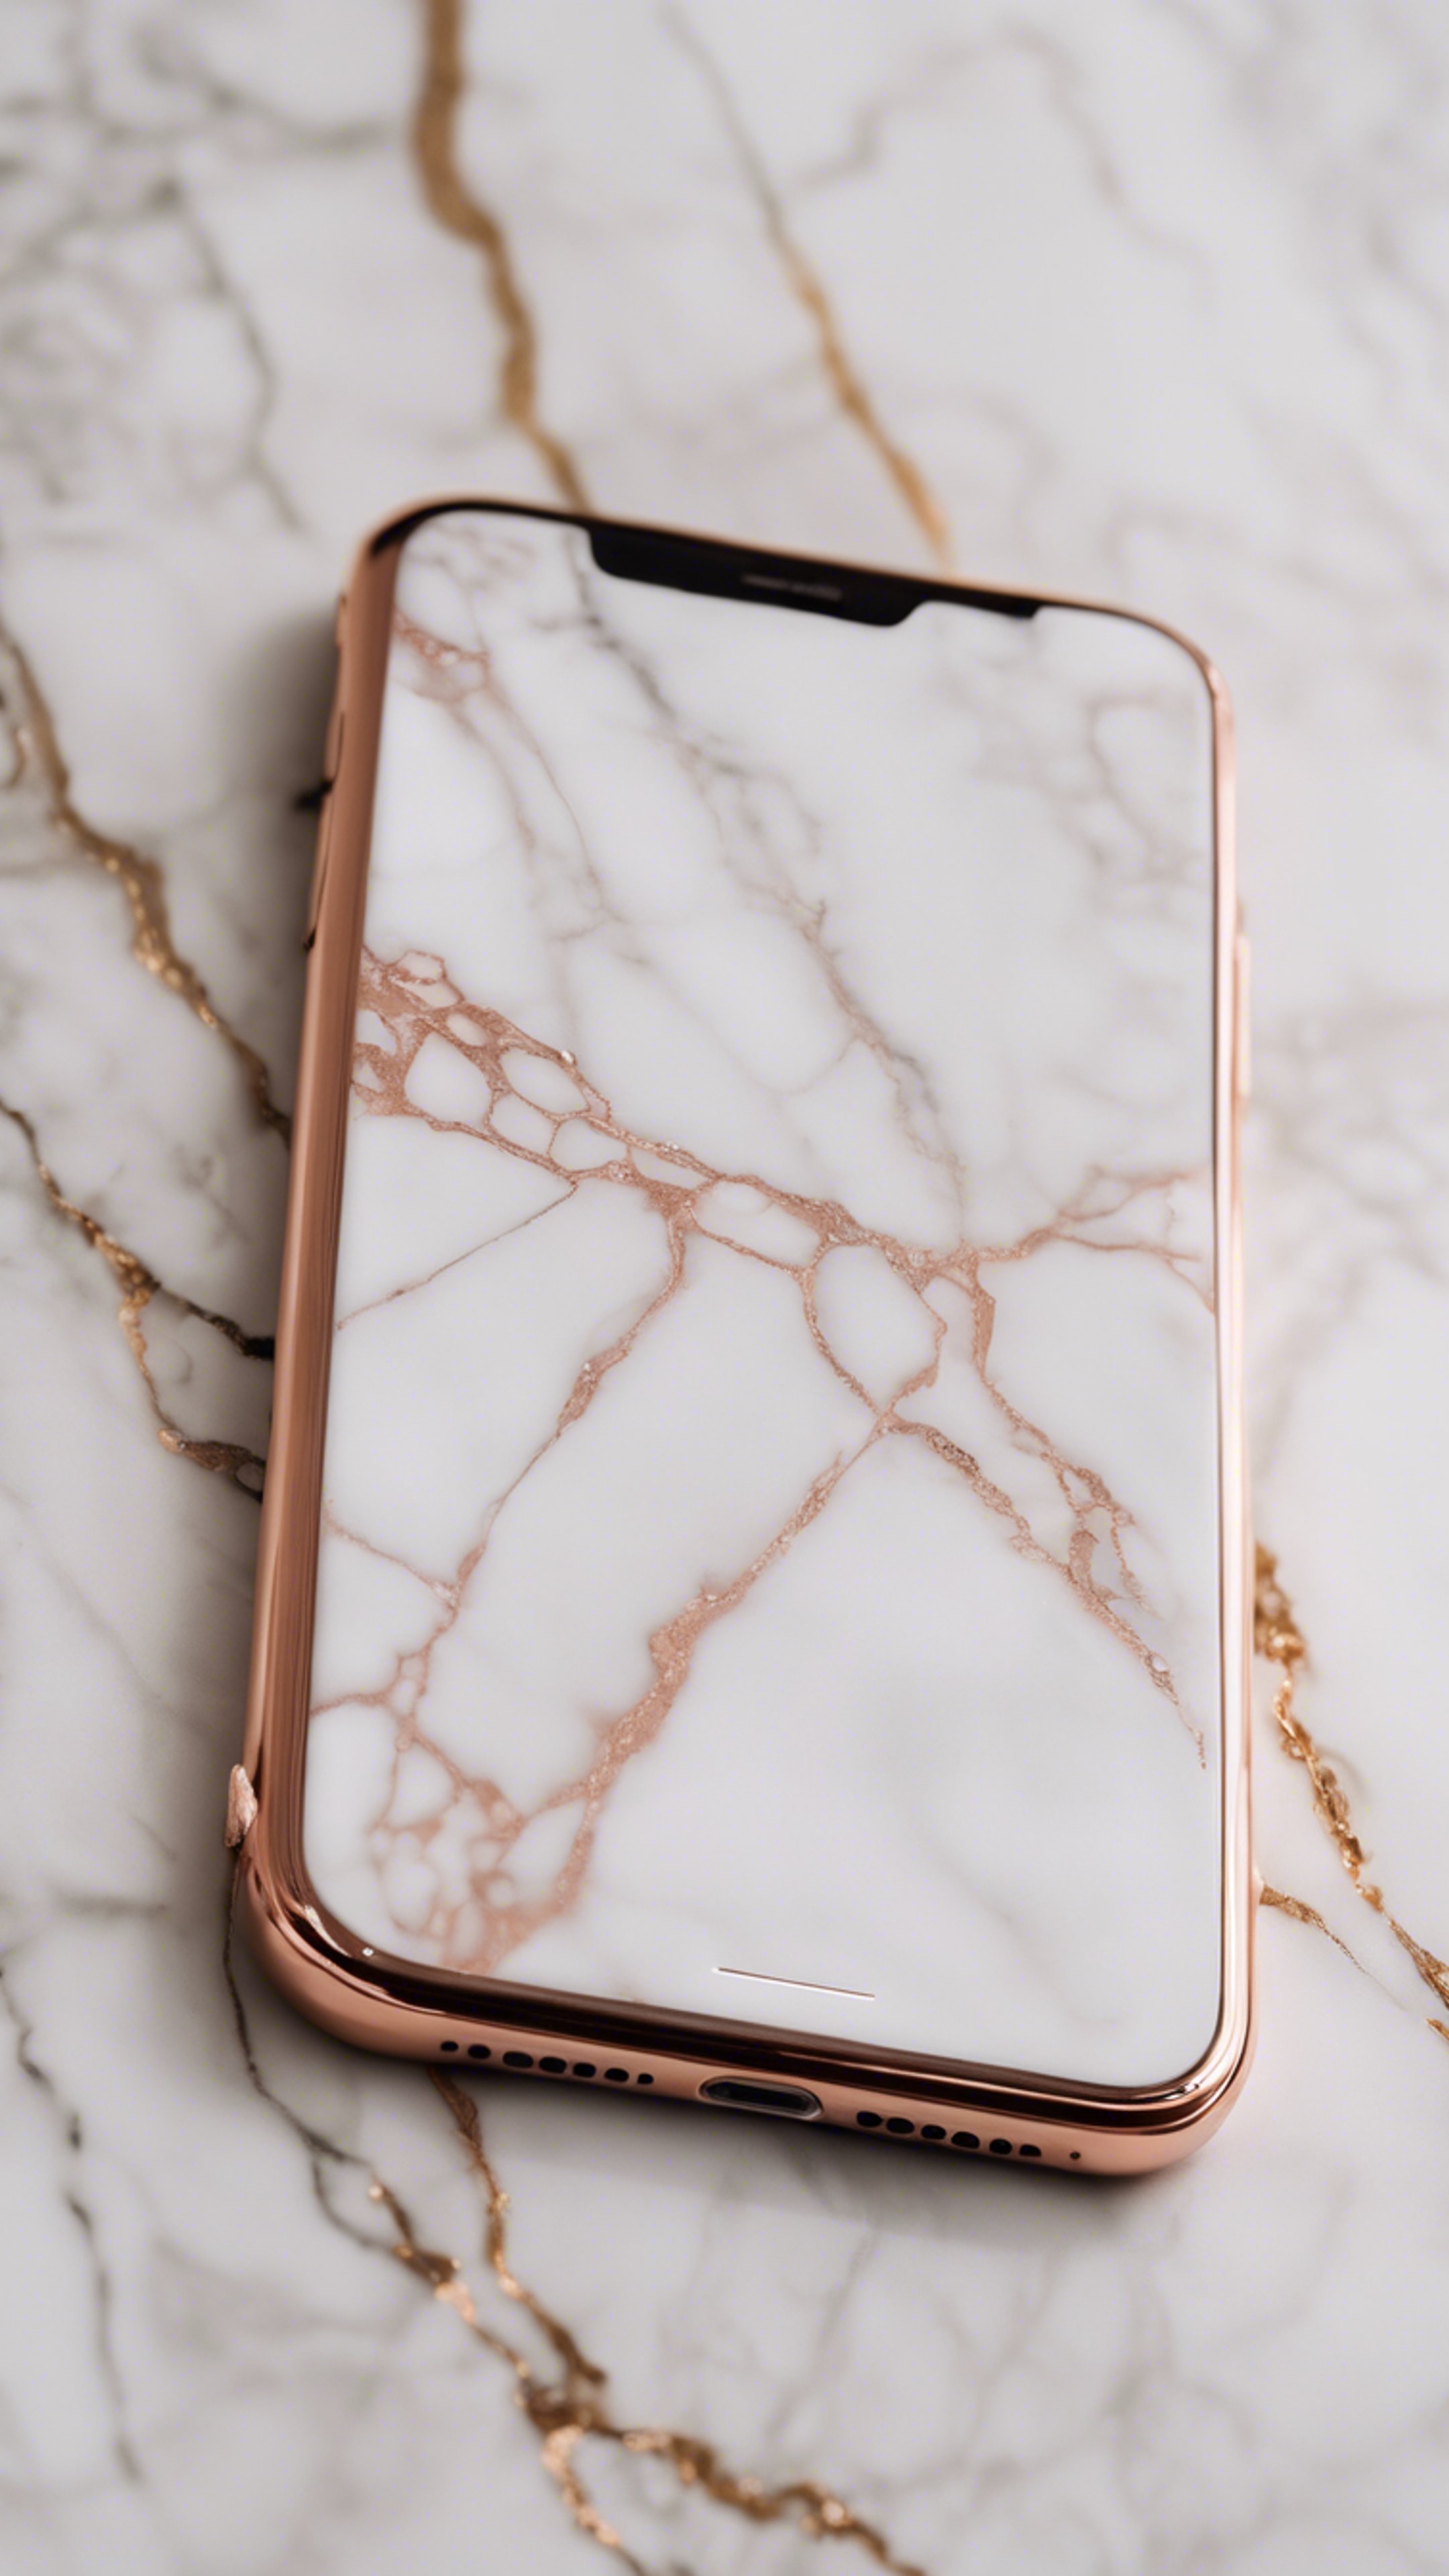 A pristine rose gold iPhone with a white marble case, laying on a marble countertop.壁紙[943dd7cf1d2841d5b4cf]